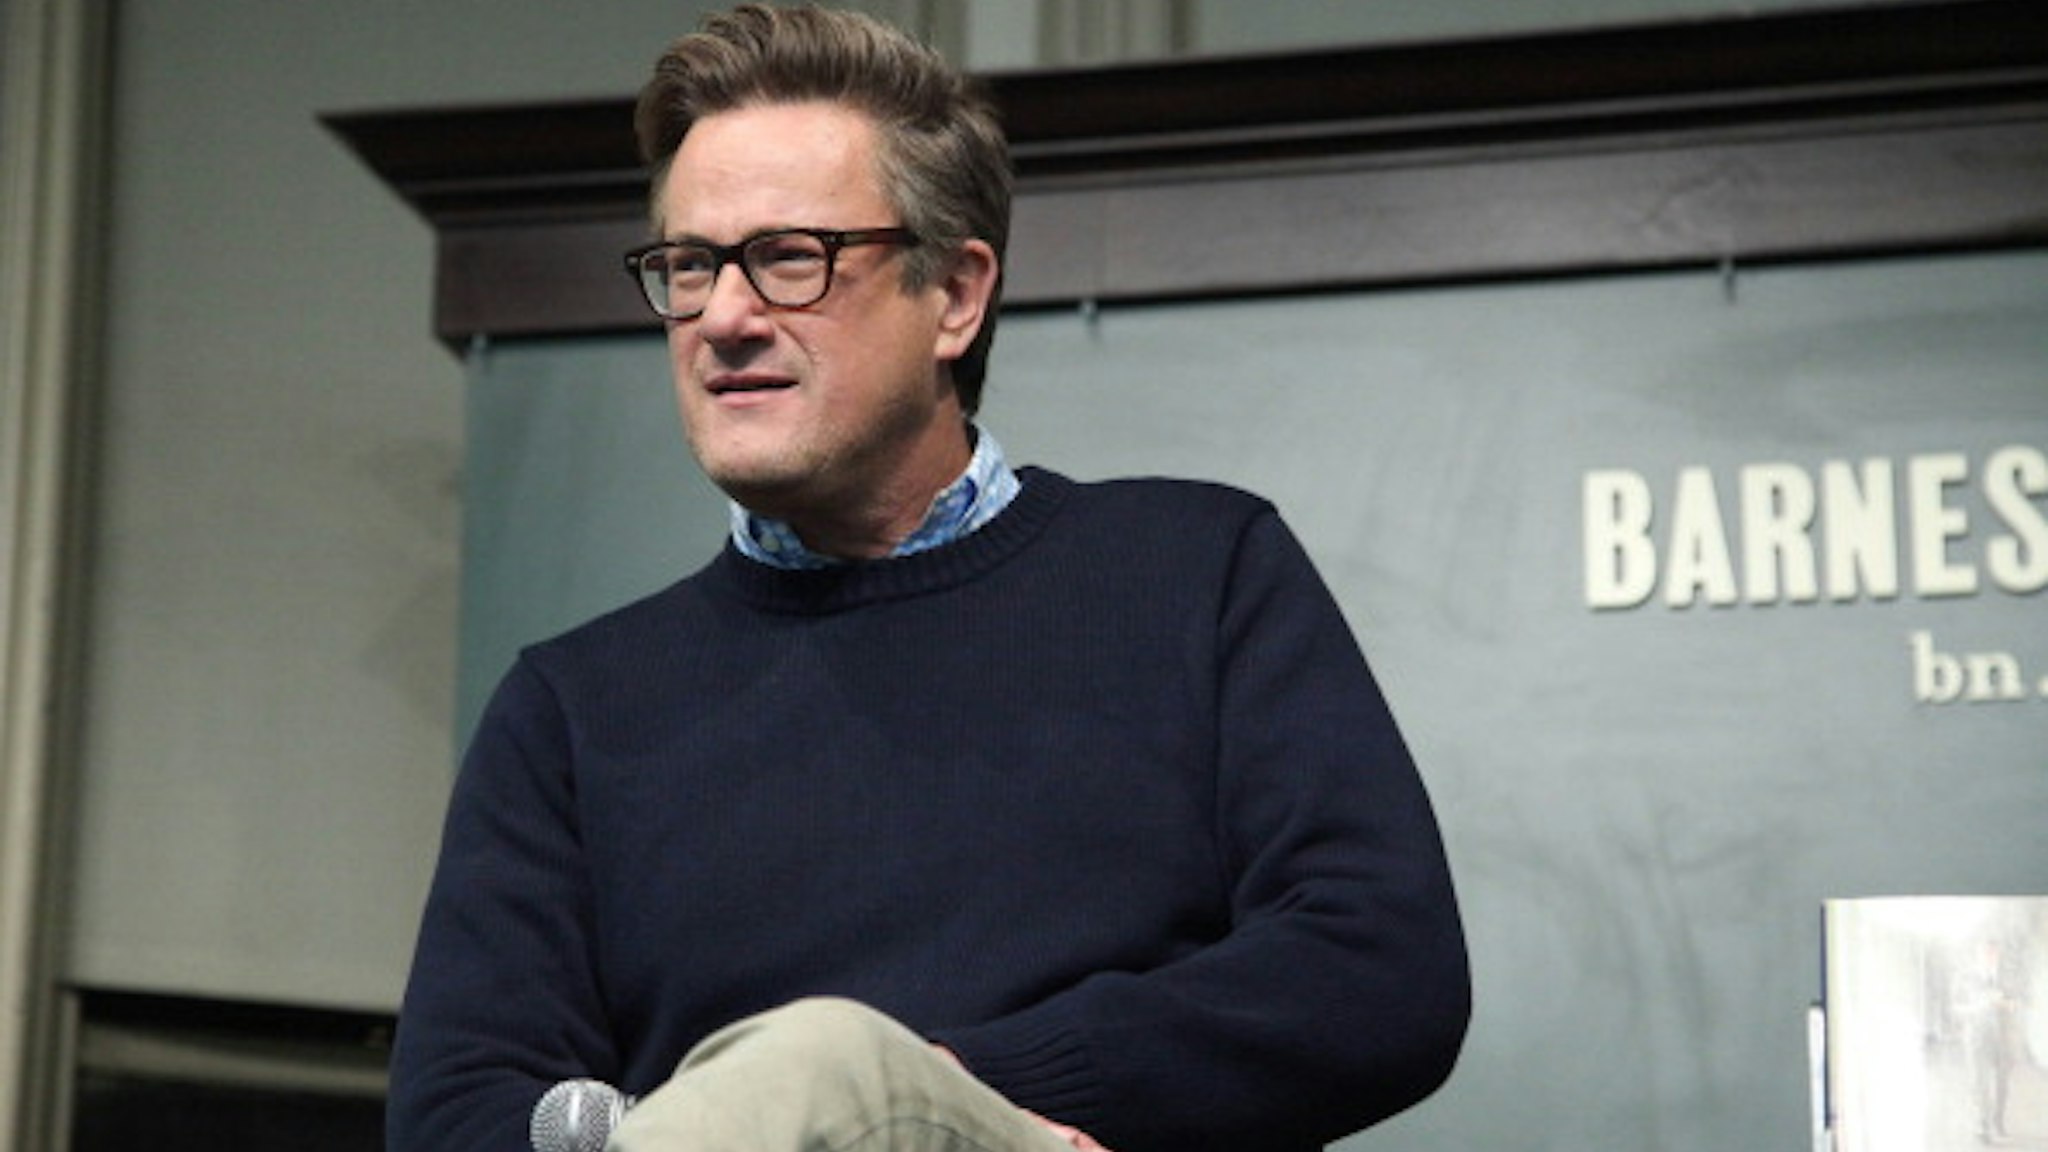 NEW YORK, NY - NOVEMBER 12: Joe Scarborough attends the "The Right Path: From Ike To Reagan, How Republicans Once Mastered Politics - And Can Again" book event on November 12, 2013 in New York, United States.